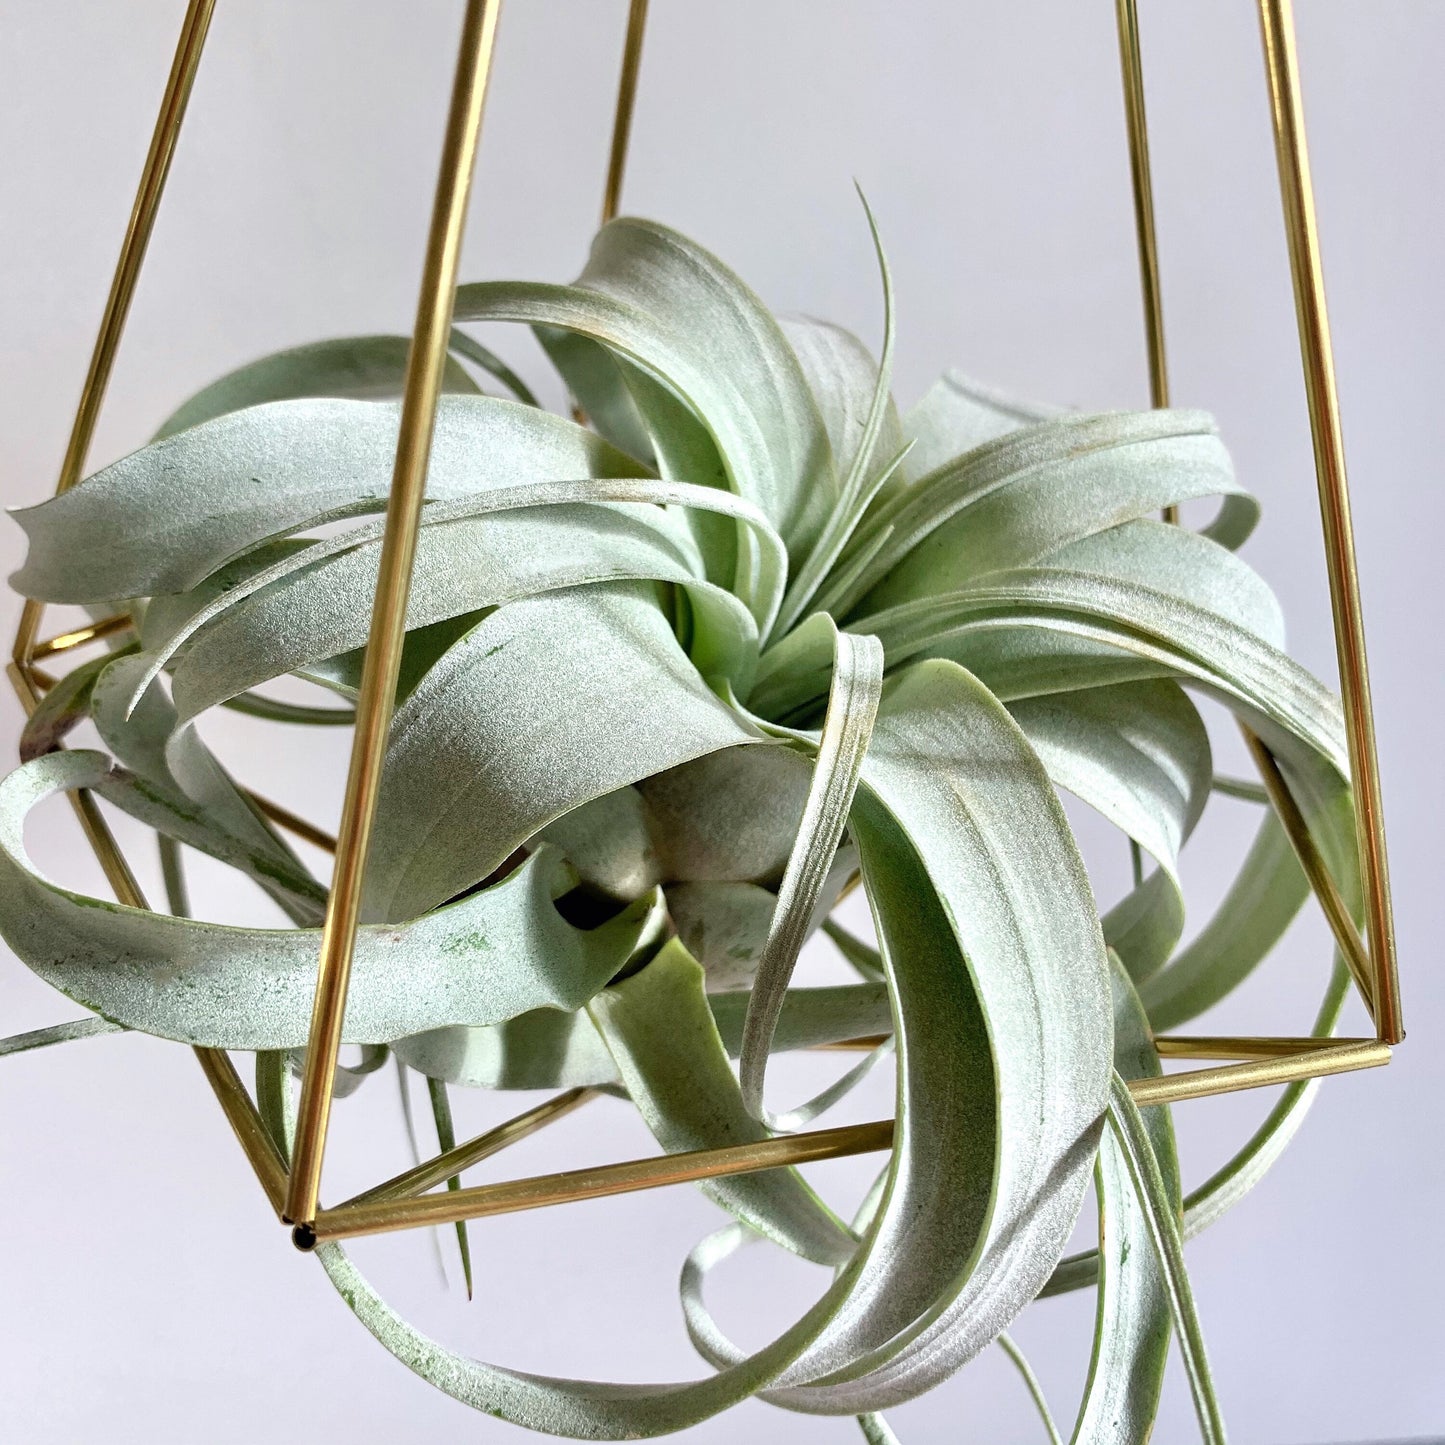 Large Air Plant Hanger (without plant)